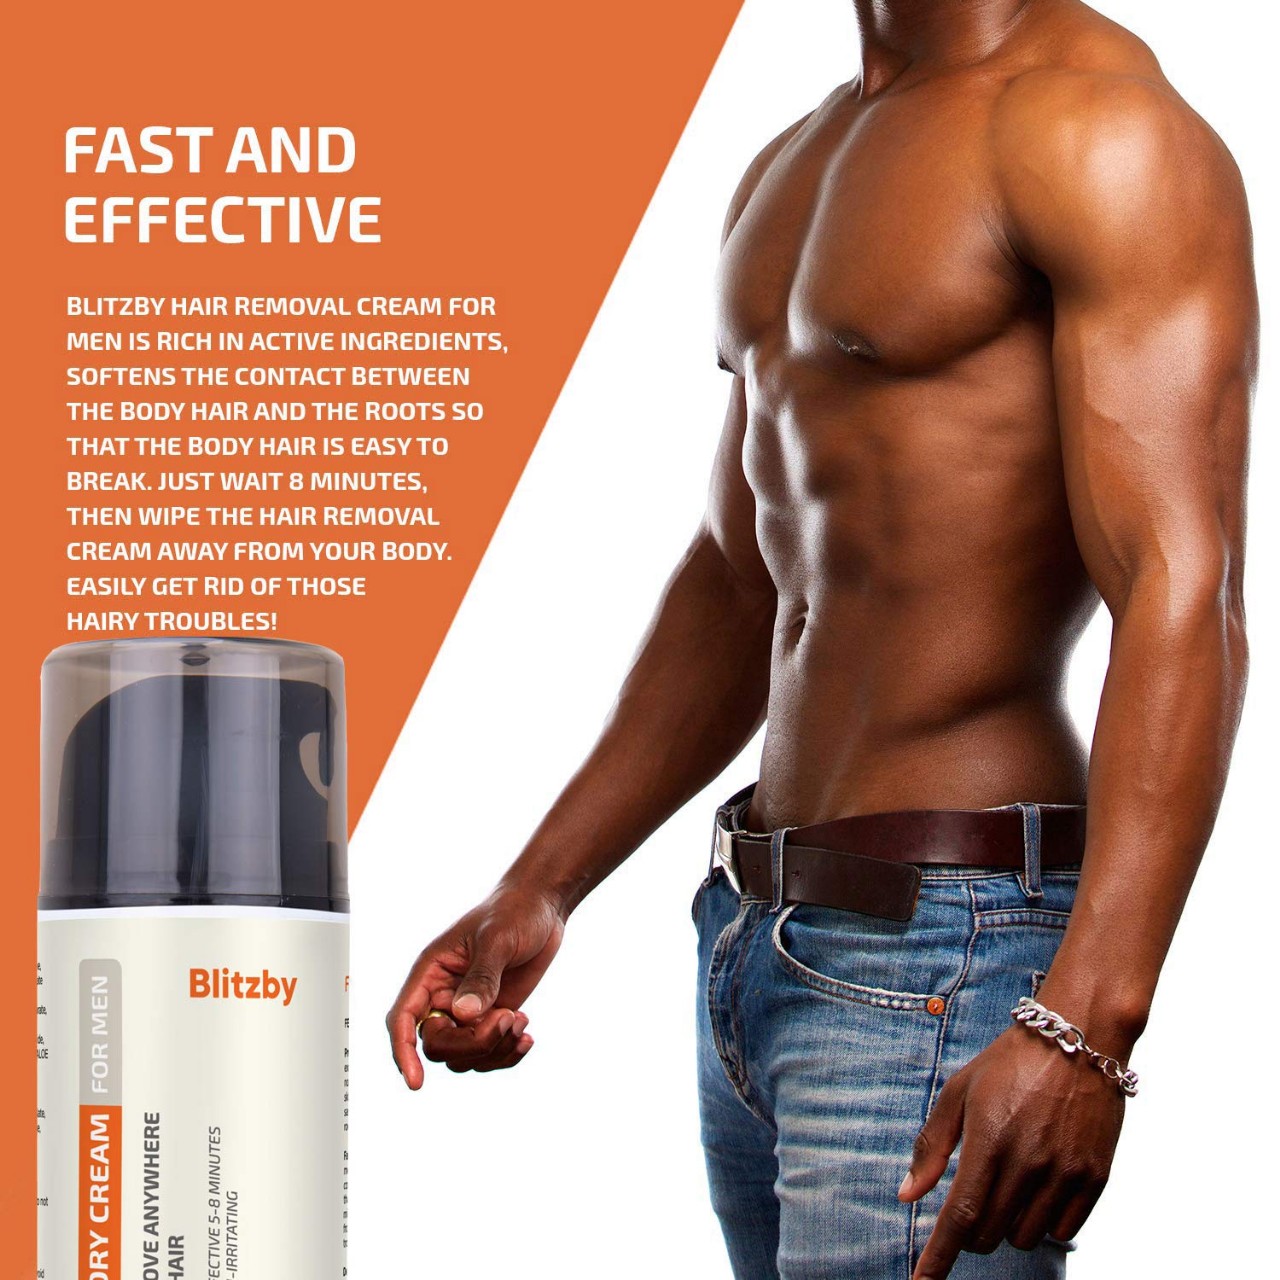 Blitzby Hair Removal Cream For Men and Depilatory Cream For Men, Effective in 10 Minutes, No smell